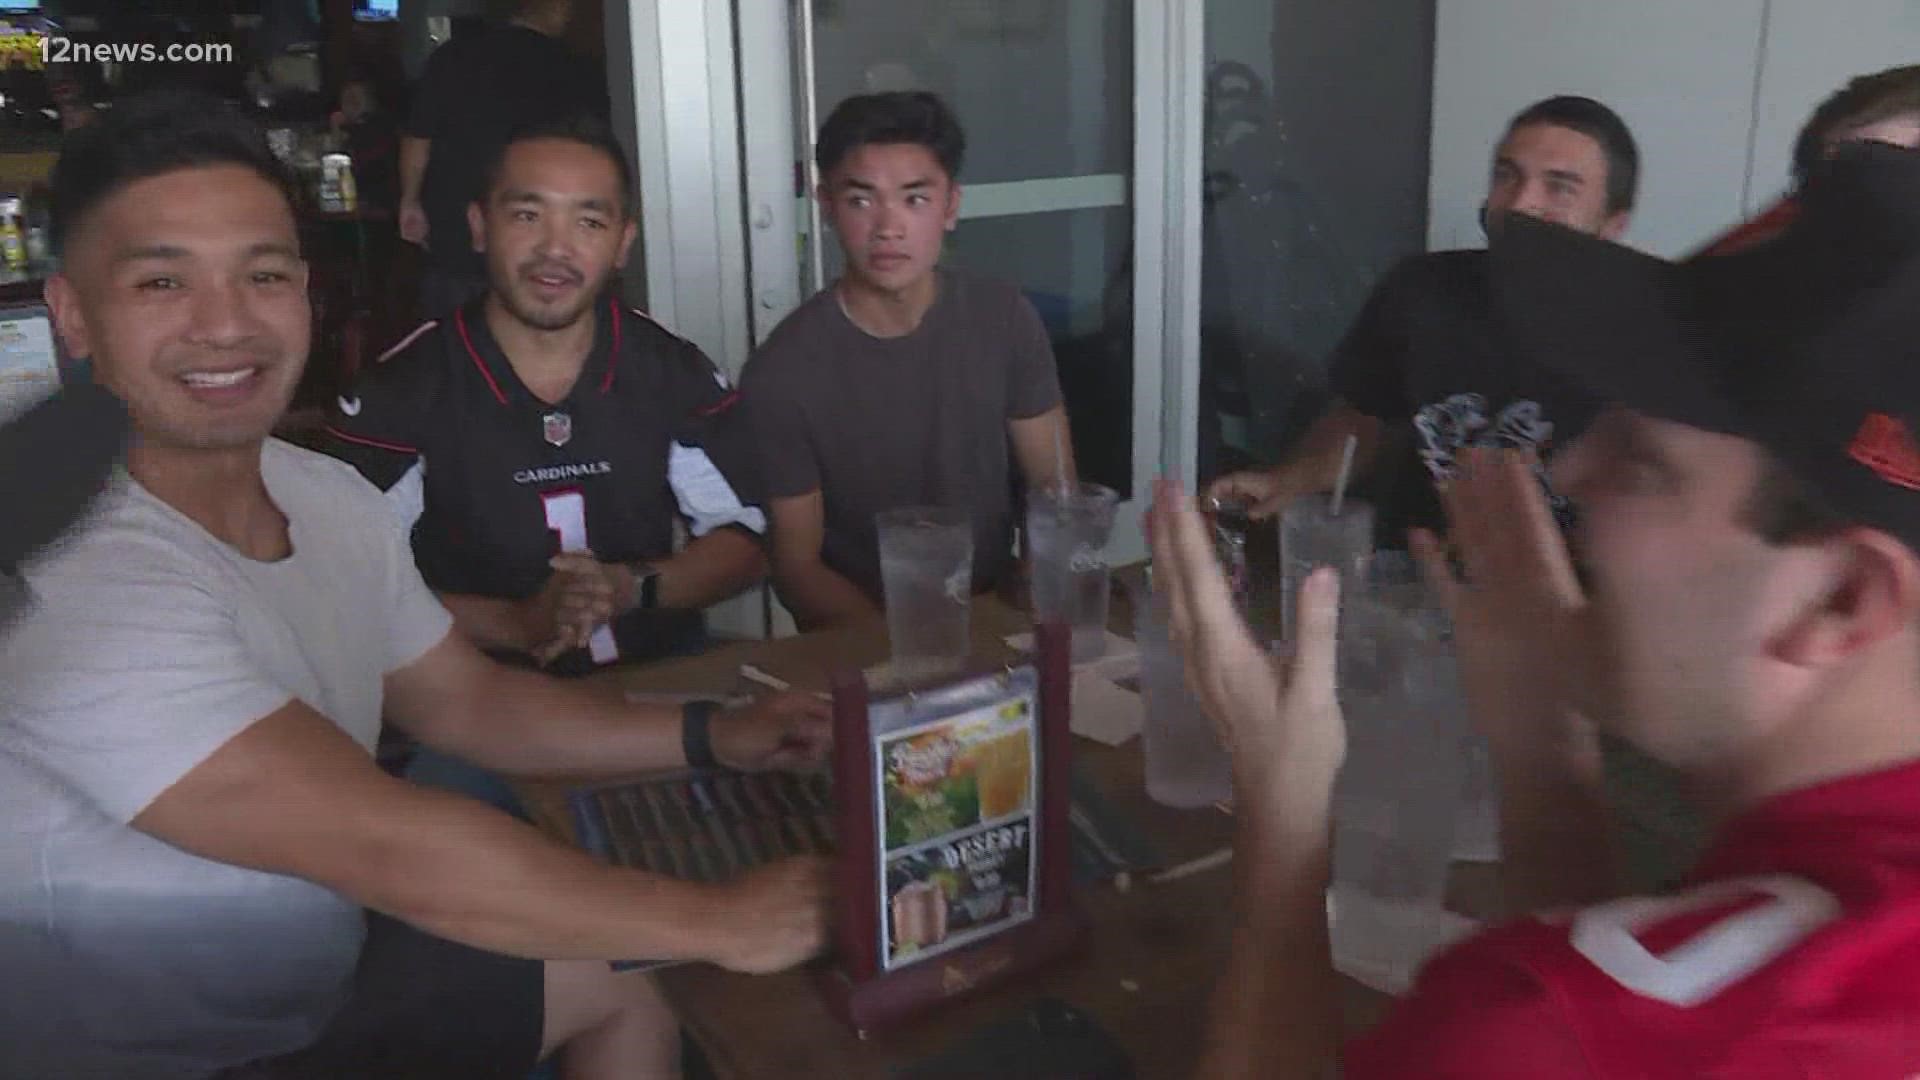 Fans gathered at the Zipps Sports Grill in Phoenix to cheer on the Arizona Cardinals as they take on the Tennessee Titans in the season opener Sunday morning.